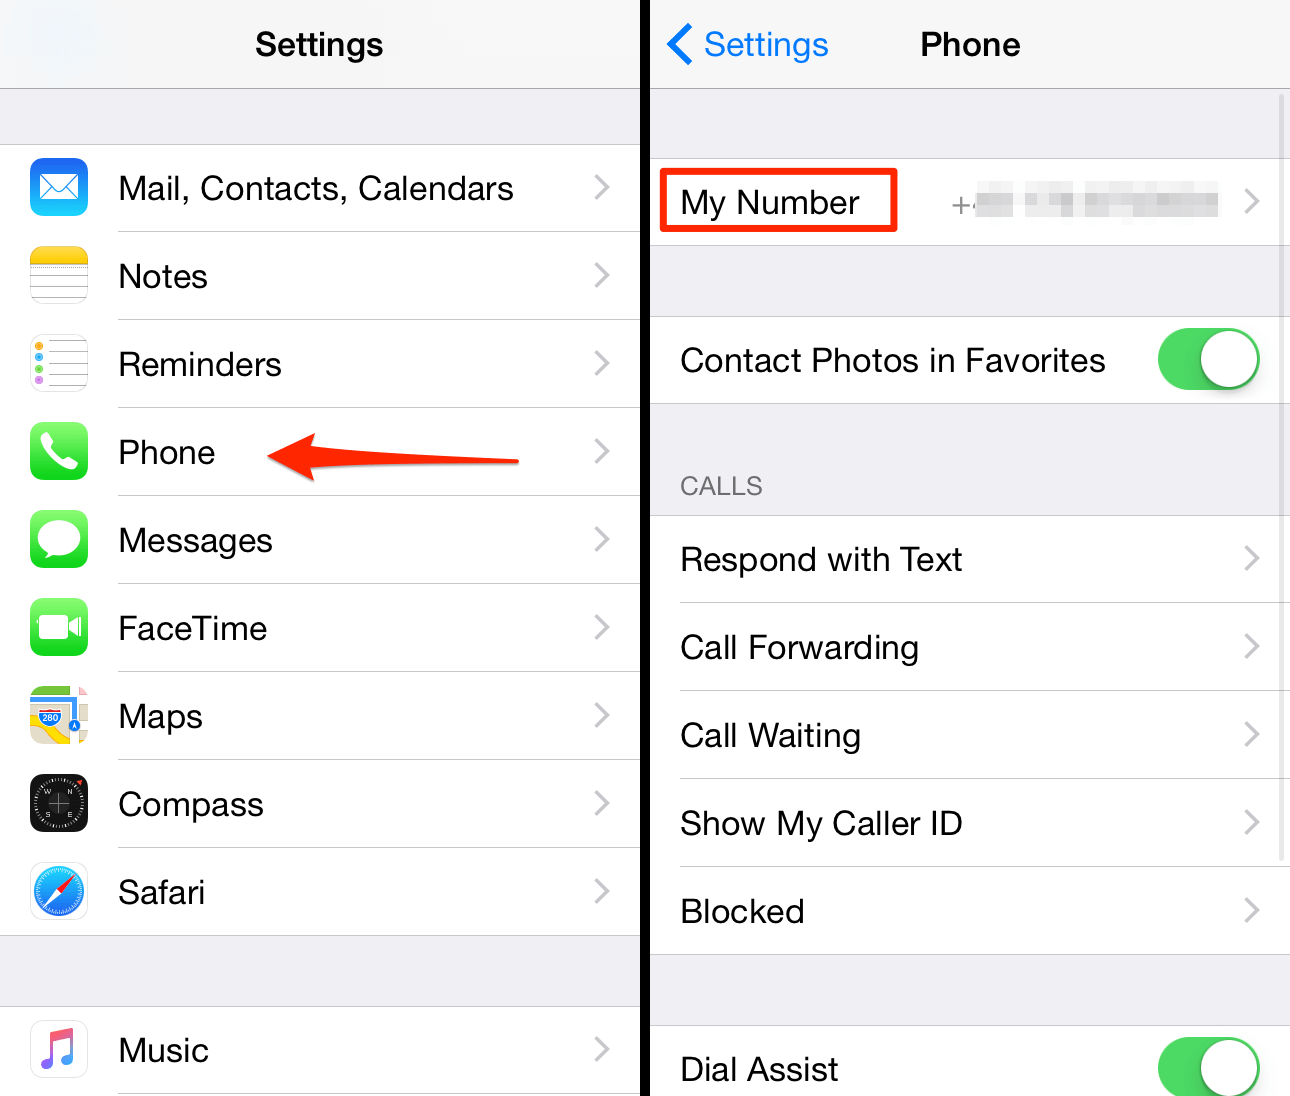 How to Find My Number on iPhone | iPhone-Tricks.com